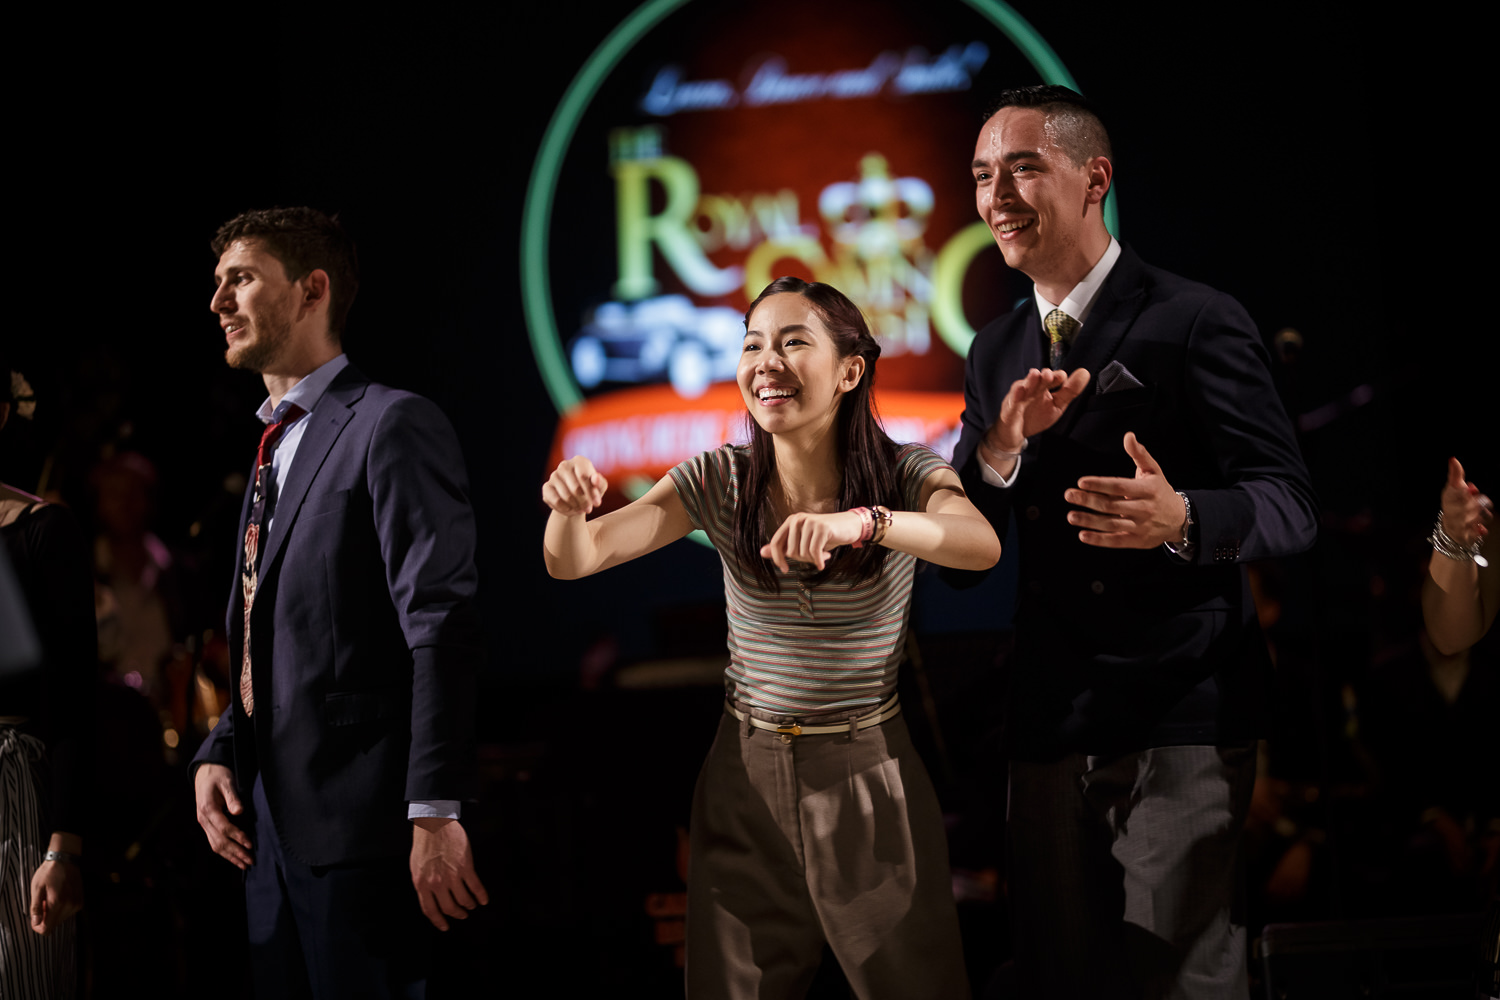  The Royal Swing Fest 2019: http://www.royalswingfest.com. Photo: www.fb.me/photosForDancersOnly - http://www.ebobrie.com/royal-swing-fest-2019 